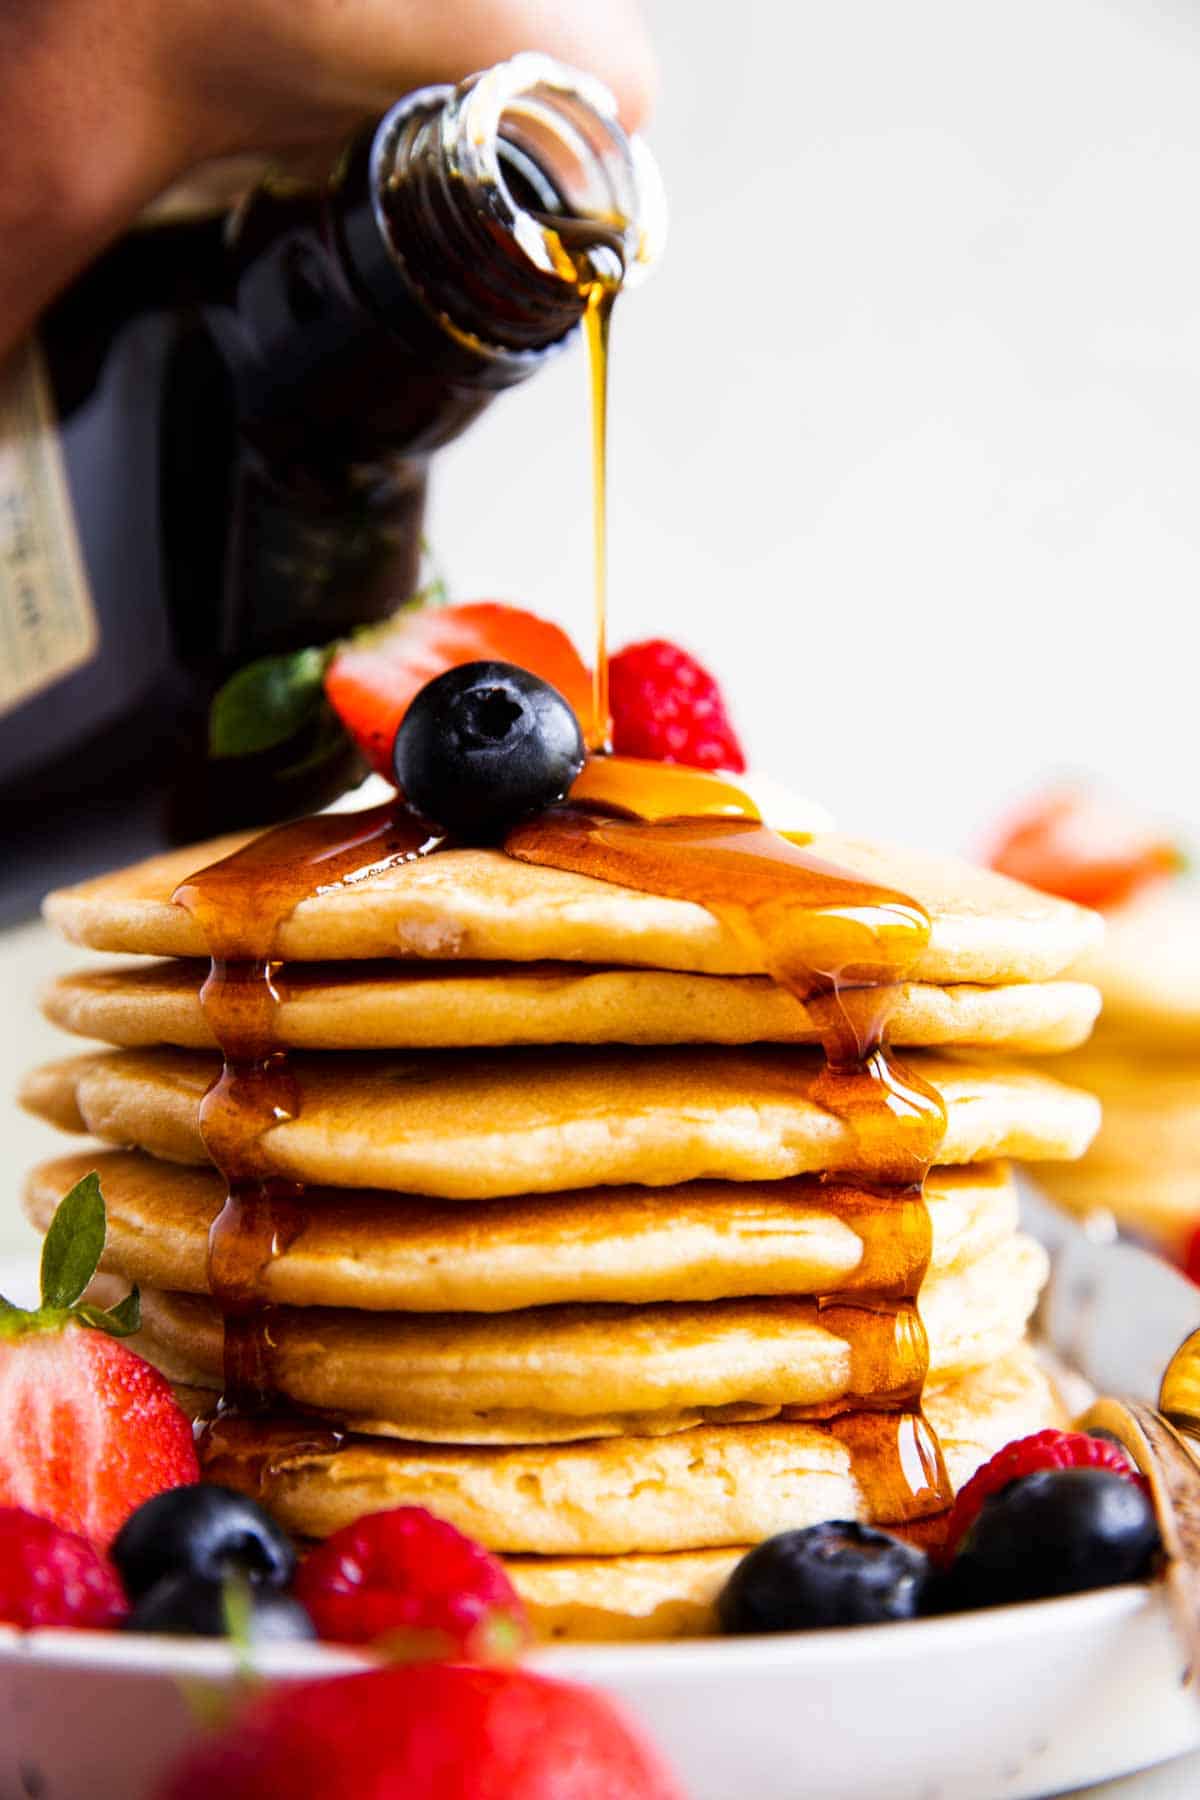 maple syrup pouring over stack of buttermilk pancakes with berries